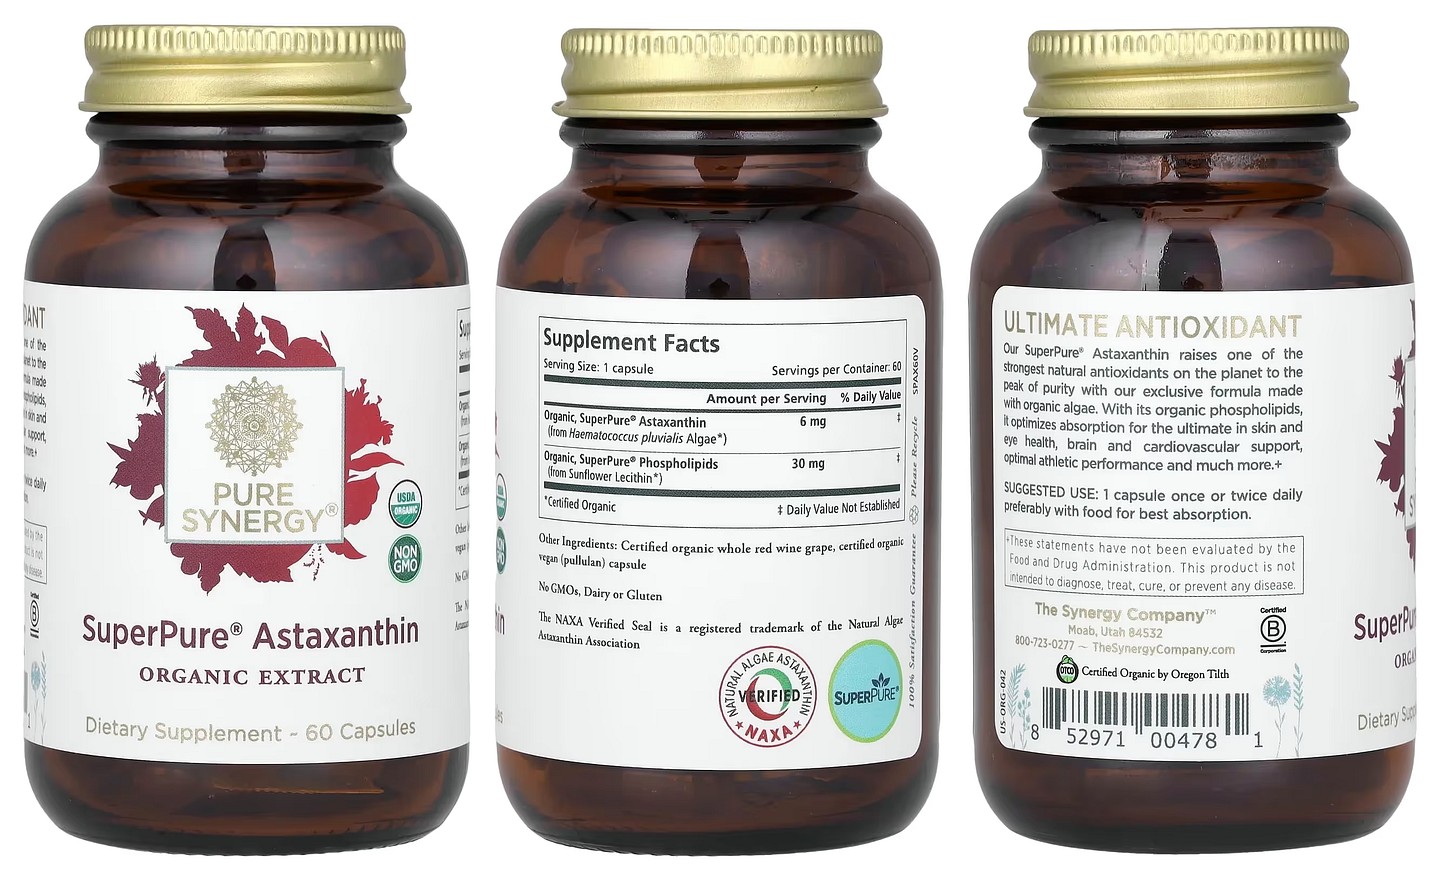 Pure Synergy, SuperPure Astaxanthin packaging